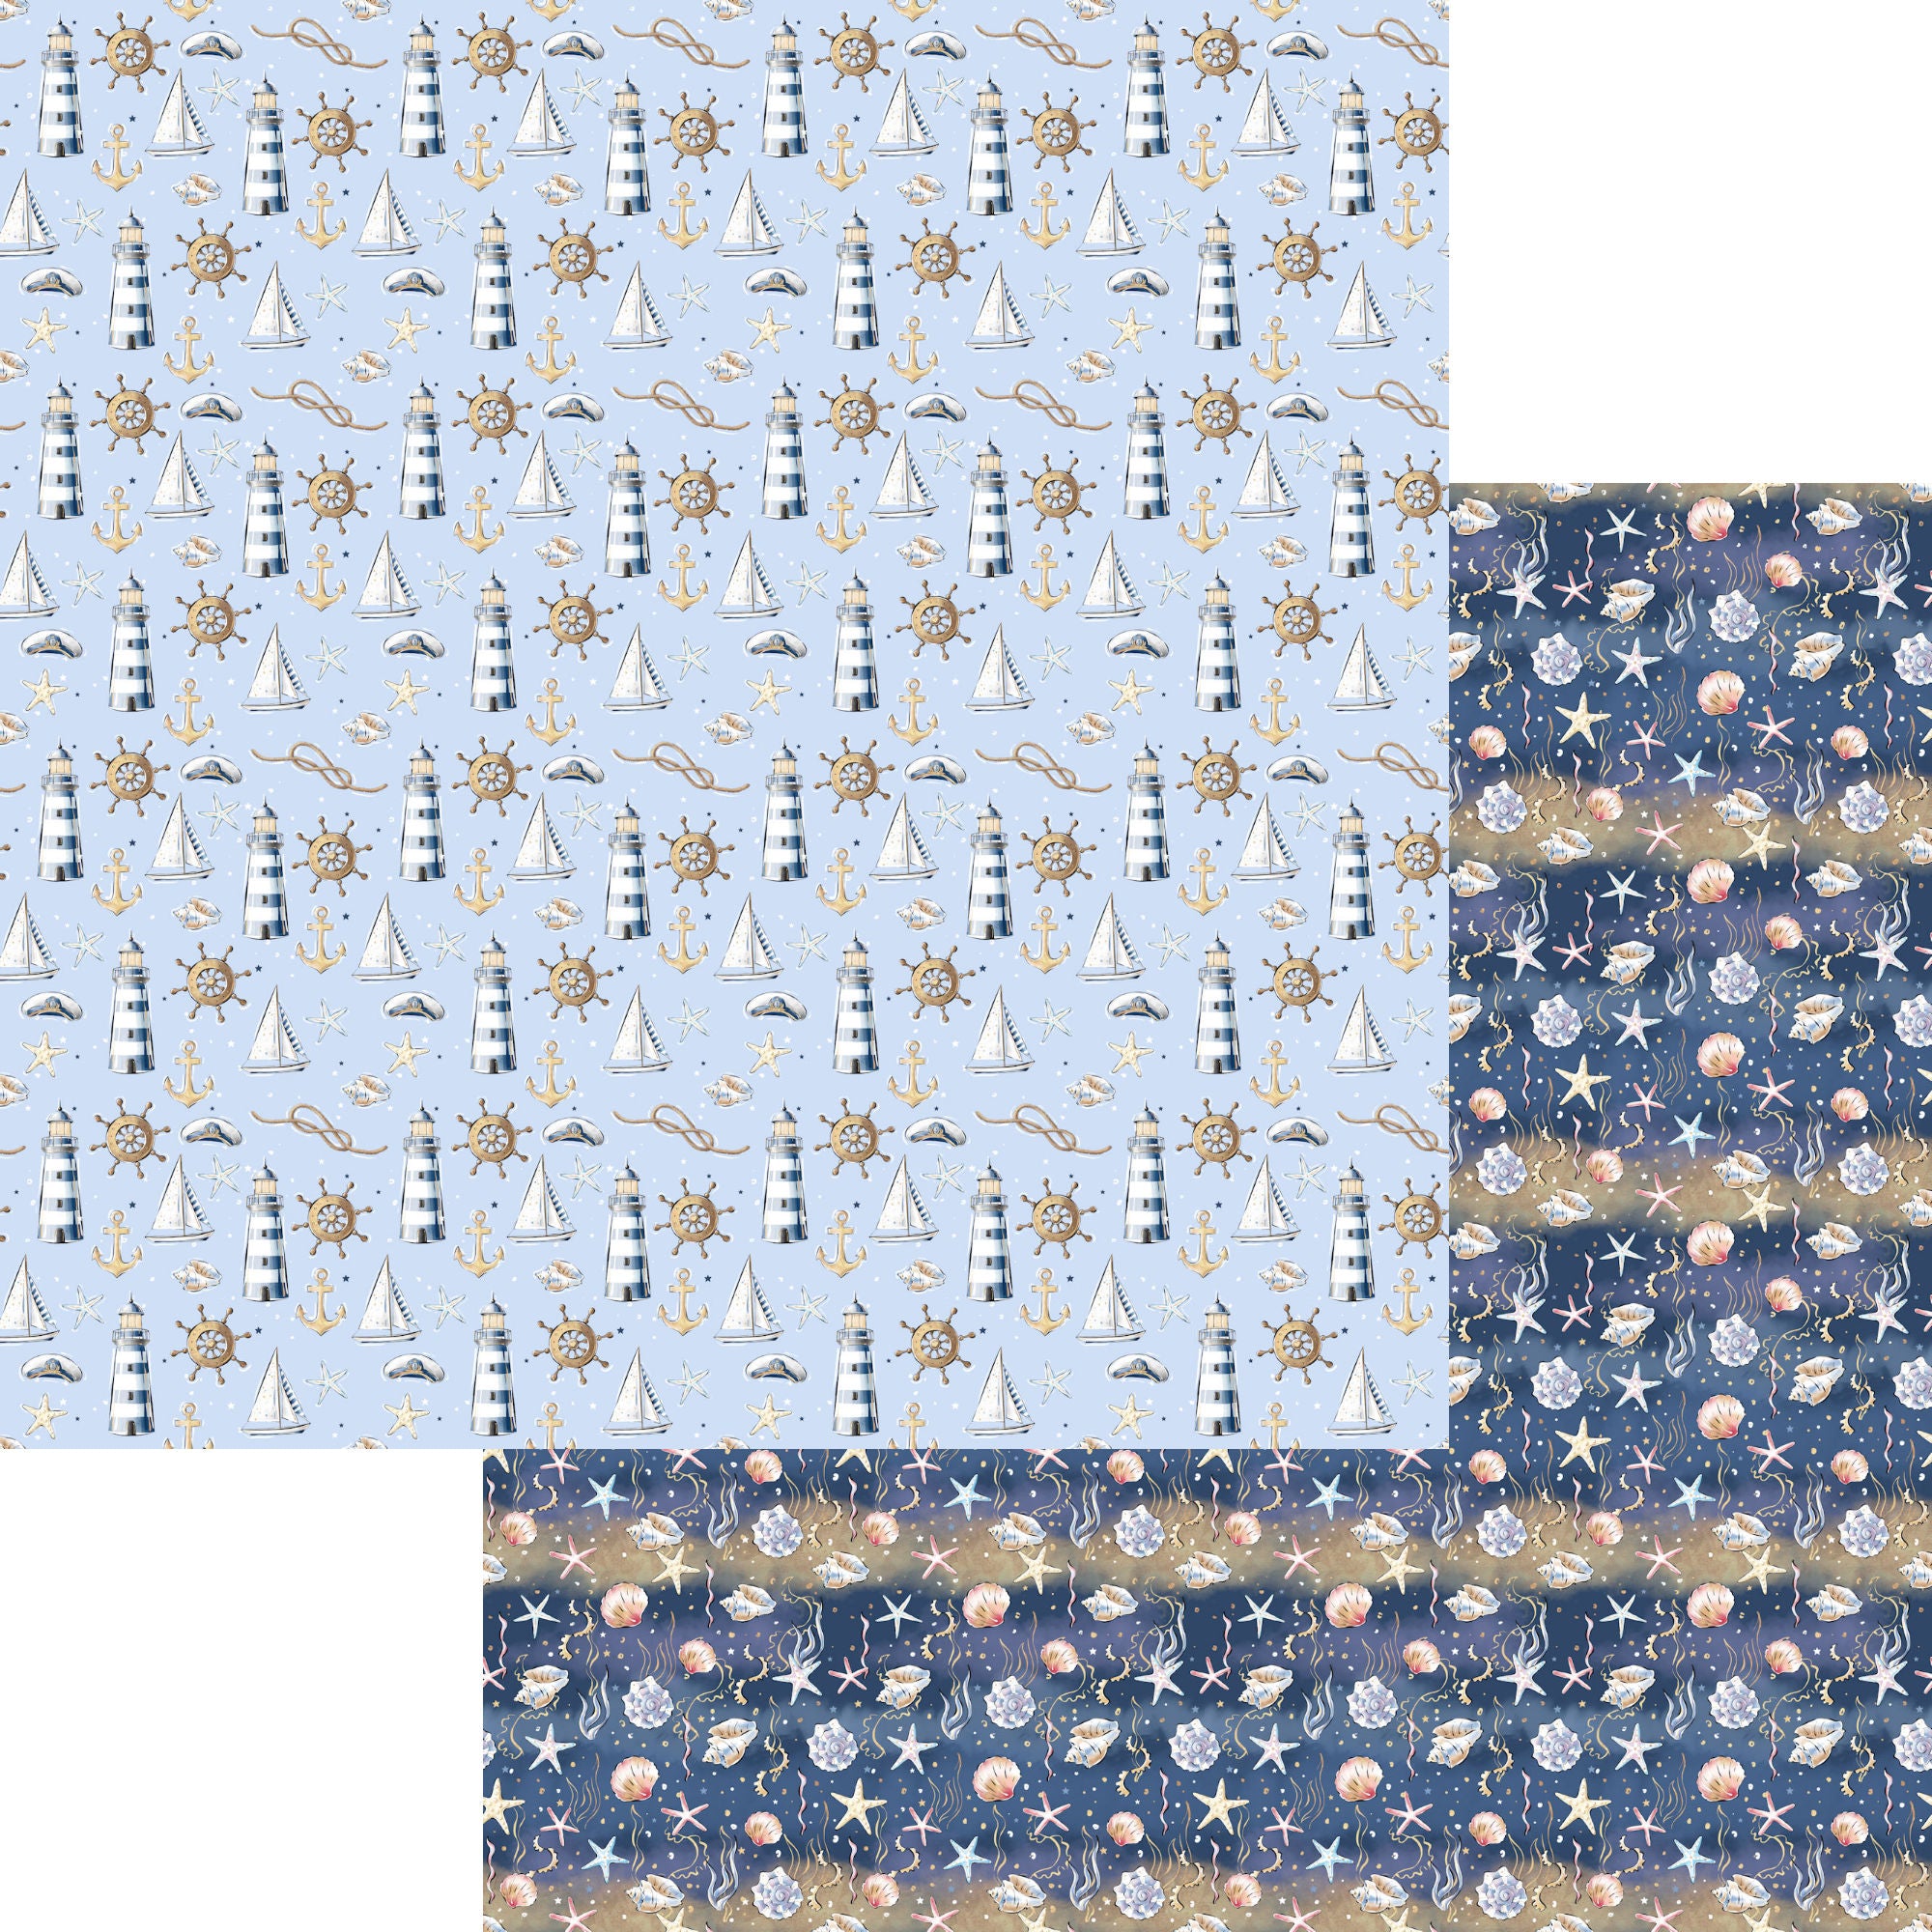 Nautical Summer Collection Lighthouse Collage 12 x 12 Double-Sided Scrapbook Paper by SSC Designs